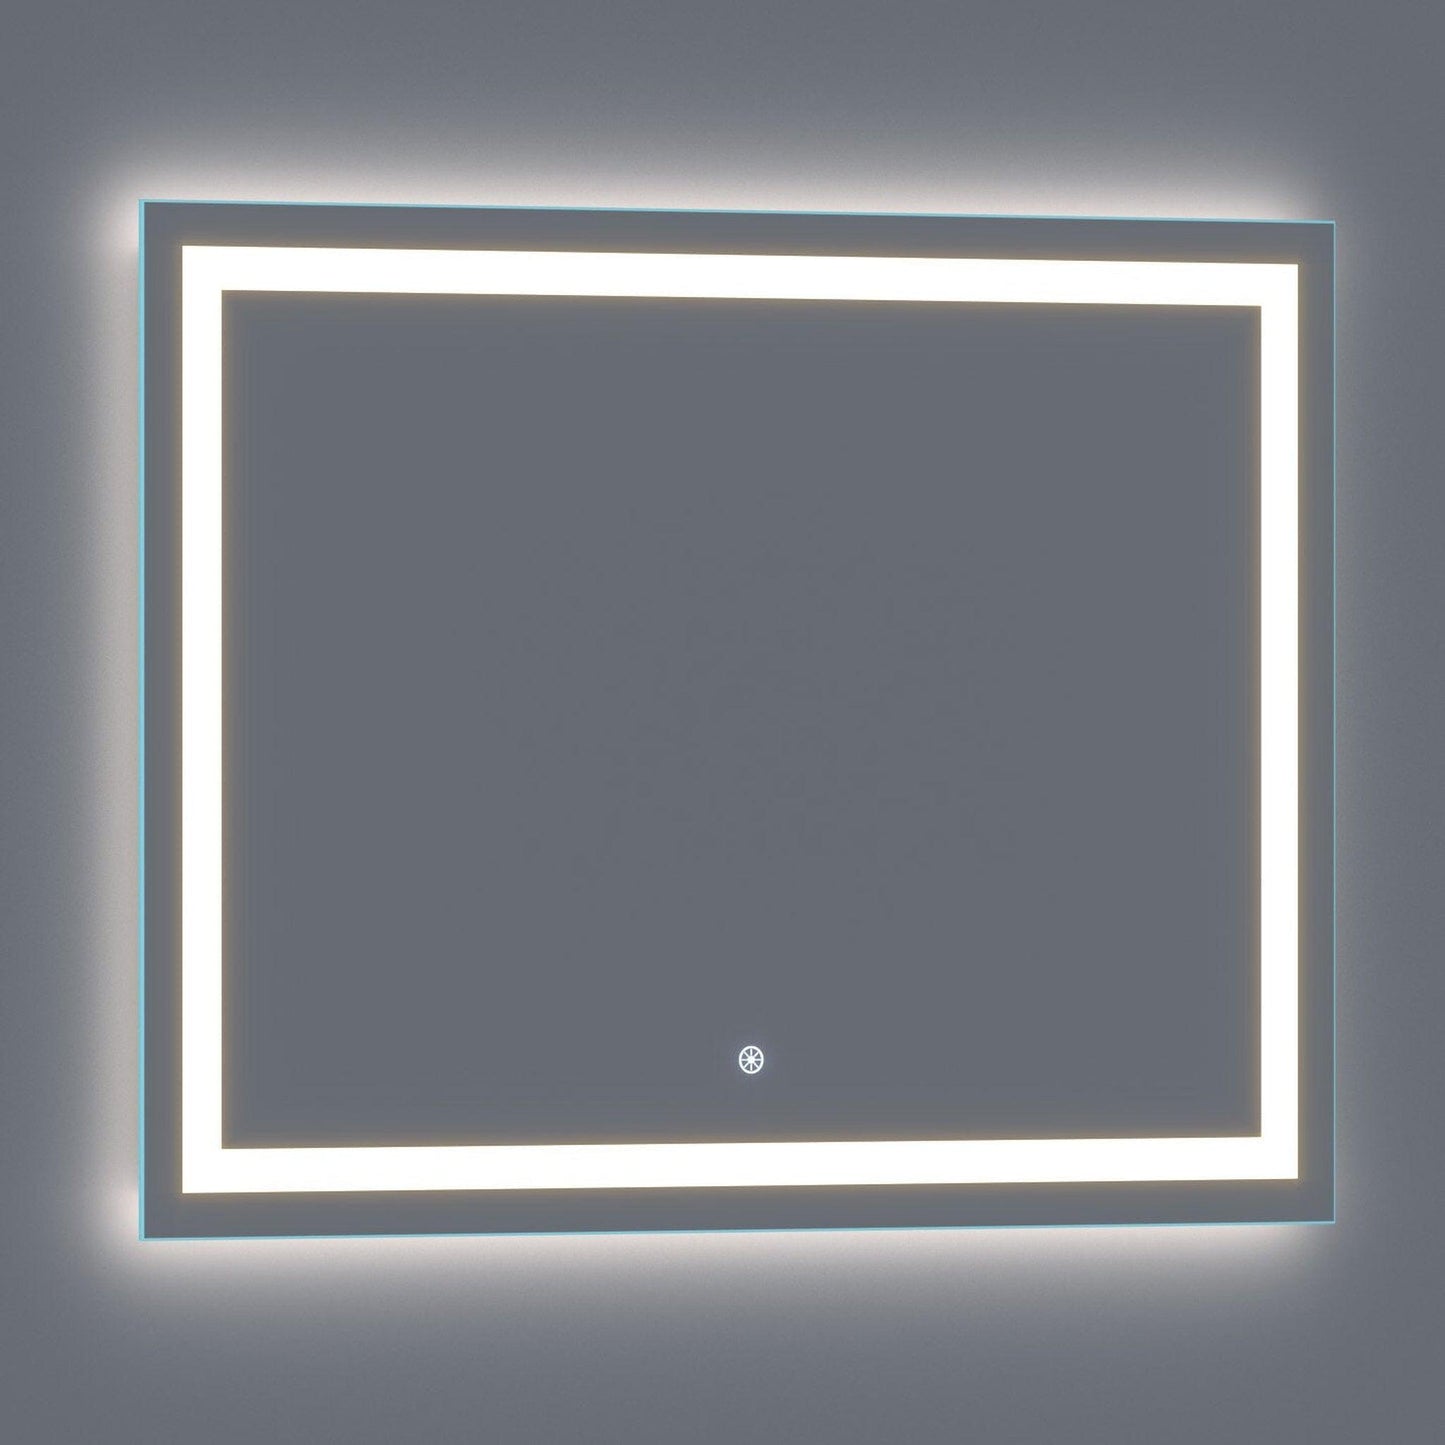 Luxaar Lumina 48" x 36" LED Lighted Vanity Mirror With Built-in Dimmer and Anti-Fog